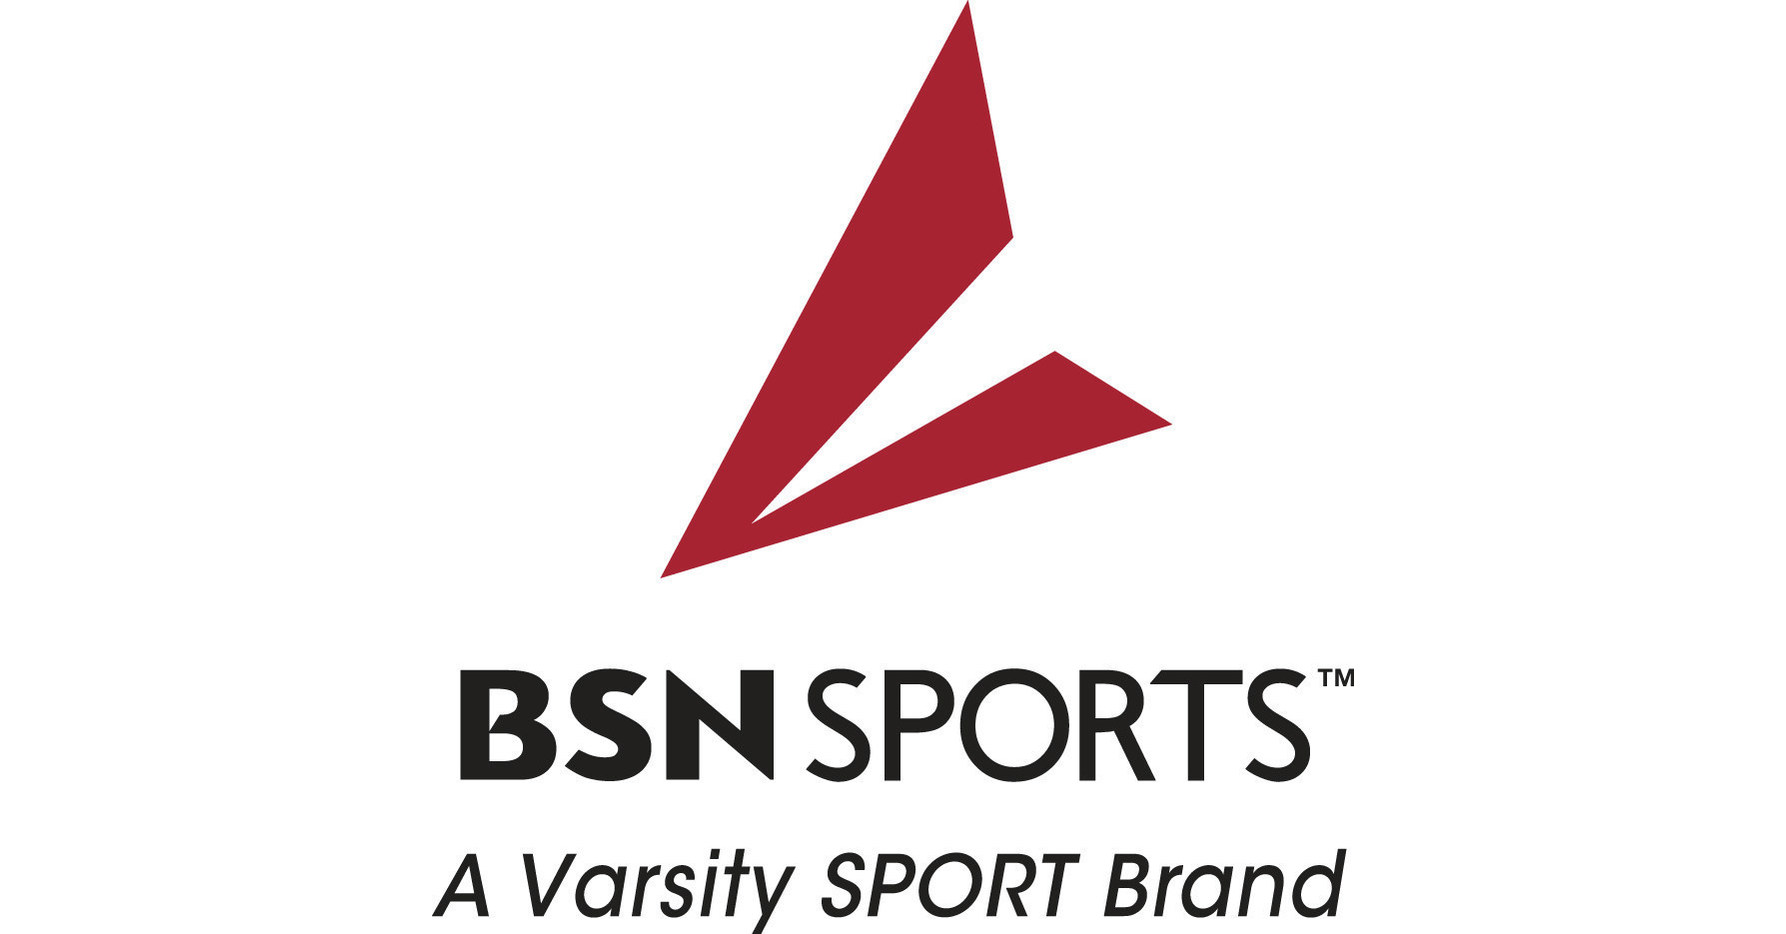 BSN SPORTS Acquires Marlow Sports, Inc., Expanding Its Mid